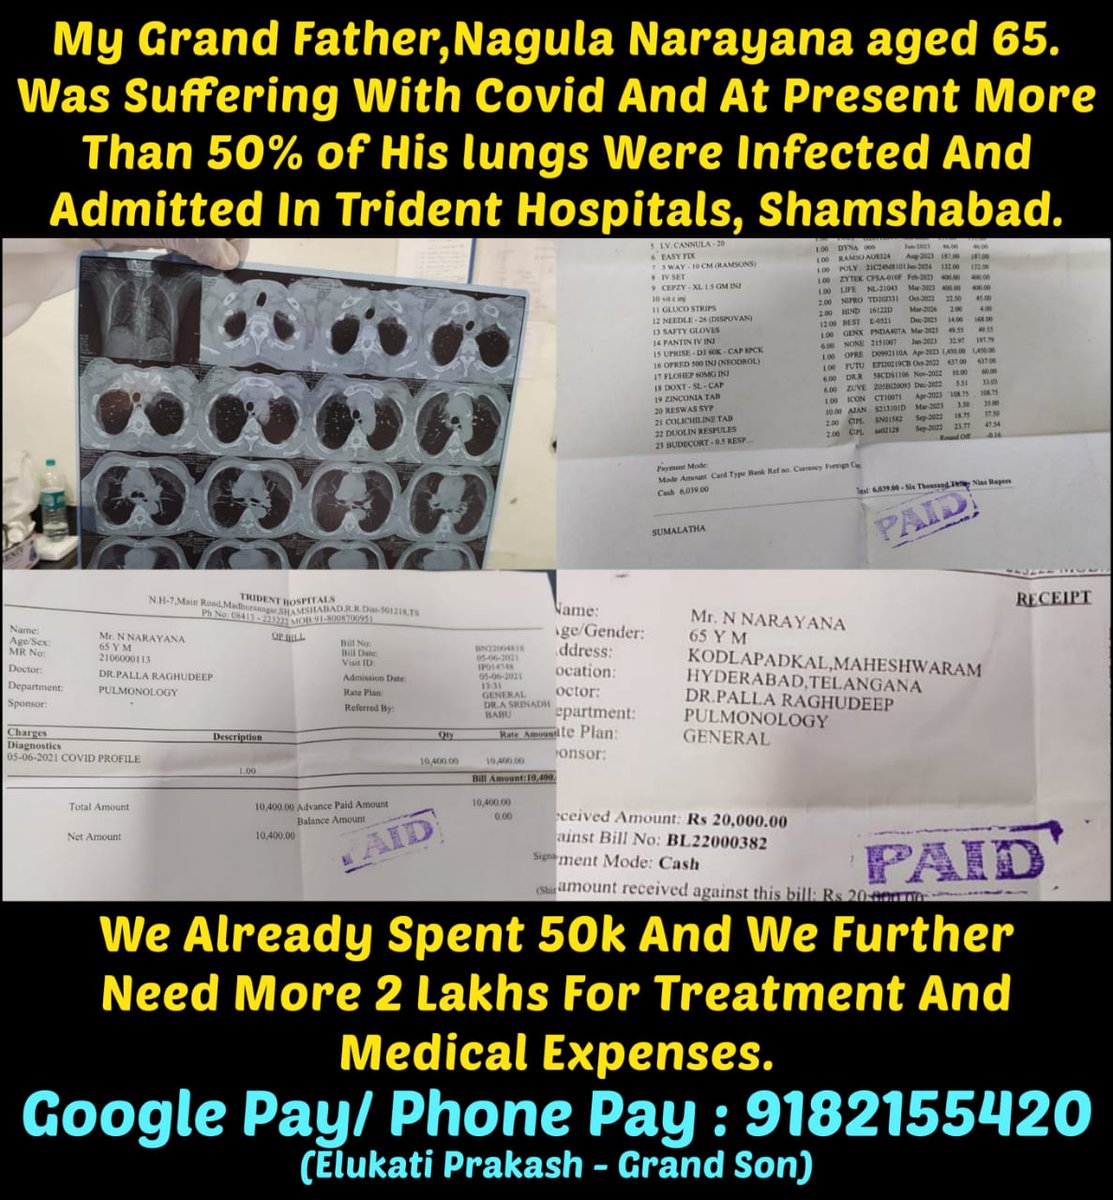 Join hands to help our friend's grandfather who is effected with #COVID19 & suffering with lung disease.
They spent more than 50k , need 2 for further Treatment & medical expenses.

Please help🙏

Google pay / phonepe : 9182155420

#Covidhelp #covidhelphyderabad
 #COVIDEmergency